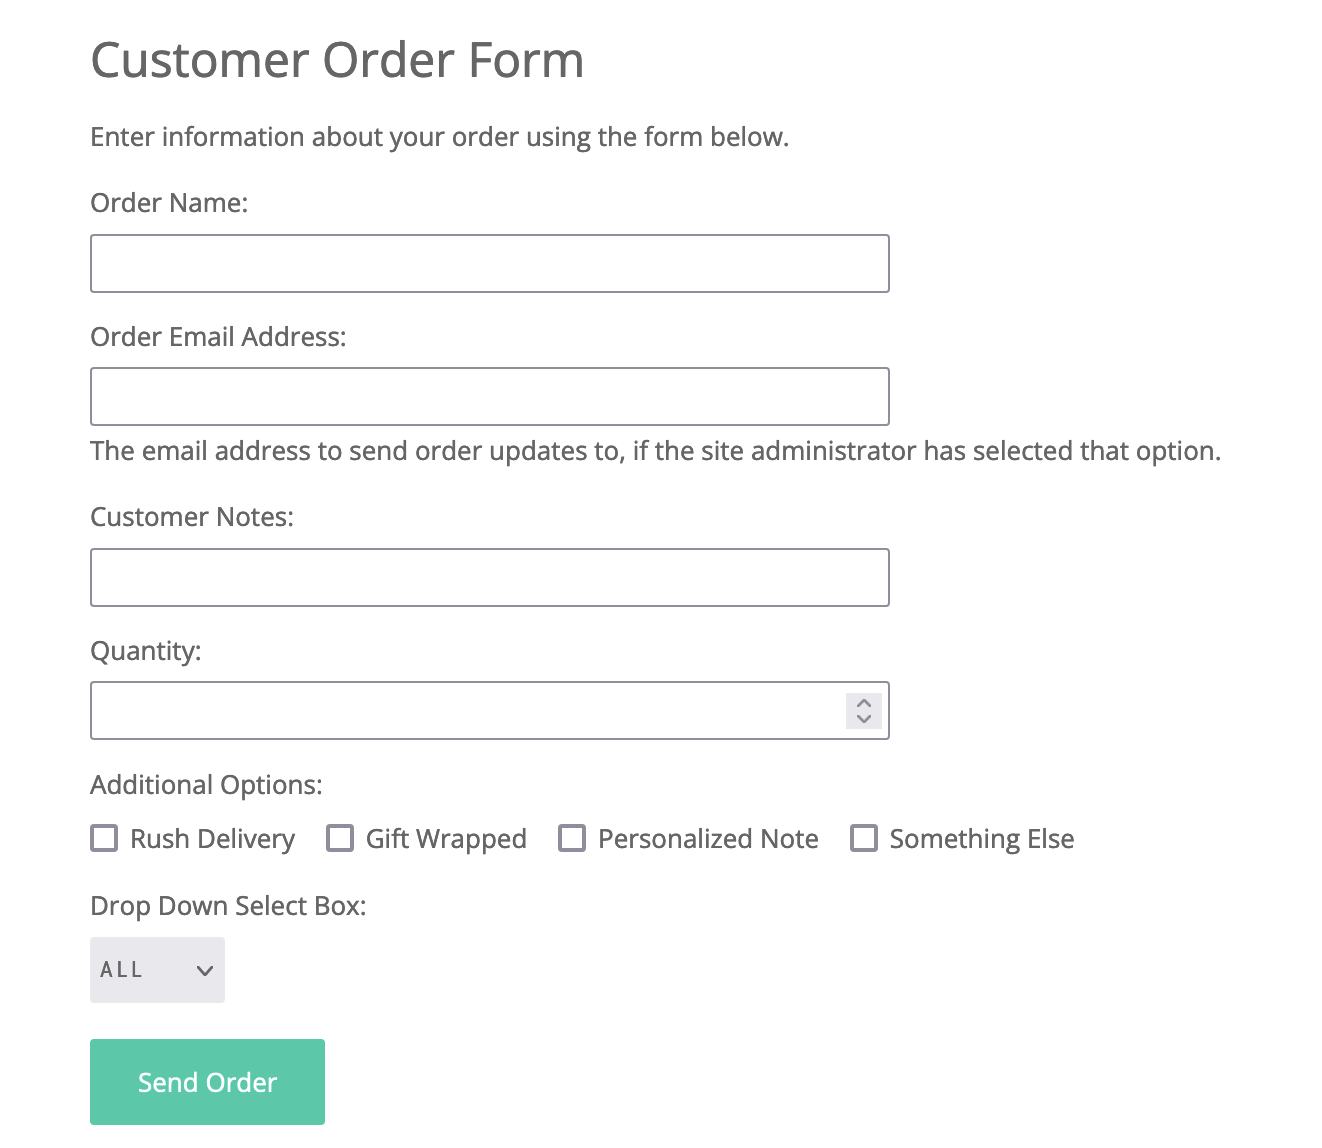 Screenshot of the front-end customer order form